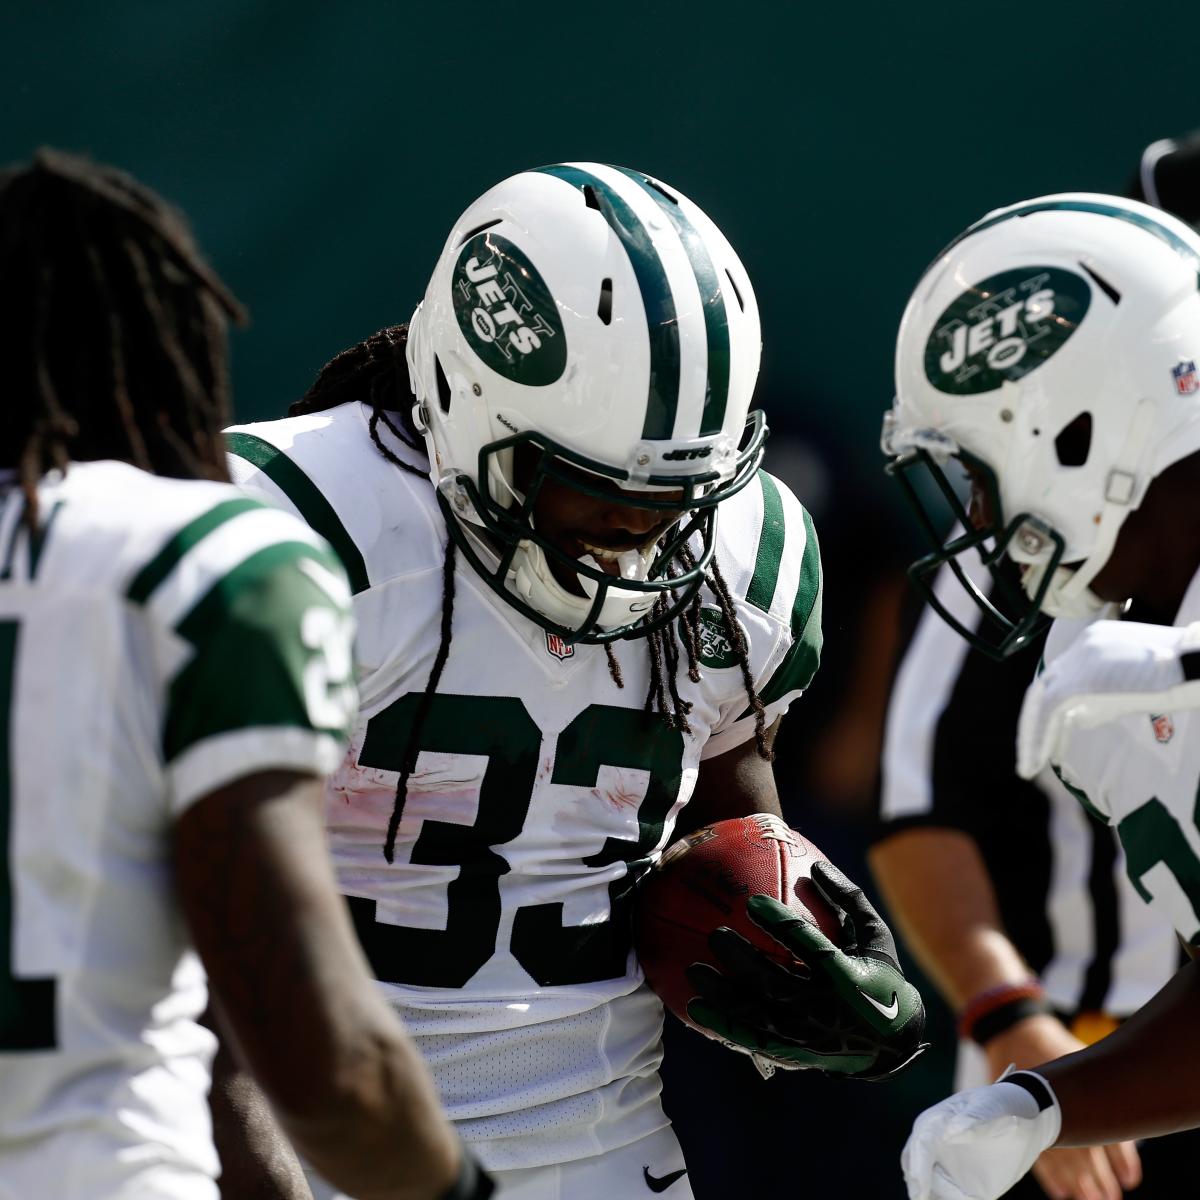 New York Jets vs. Green Bay Packers: Jets' Week 2 Game Preview